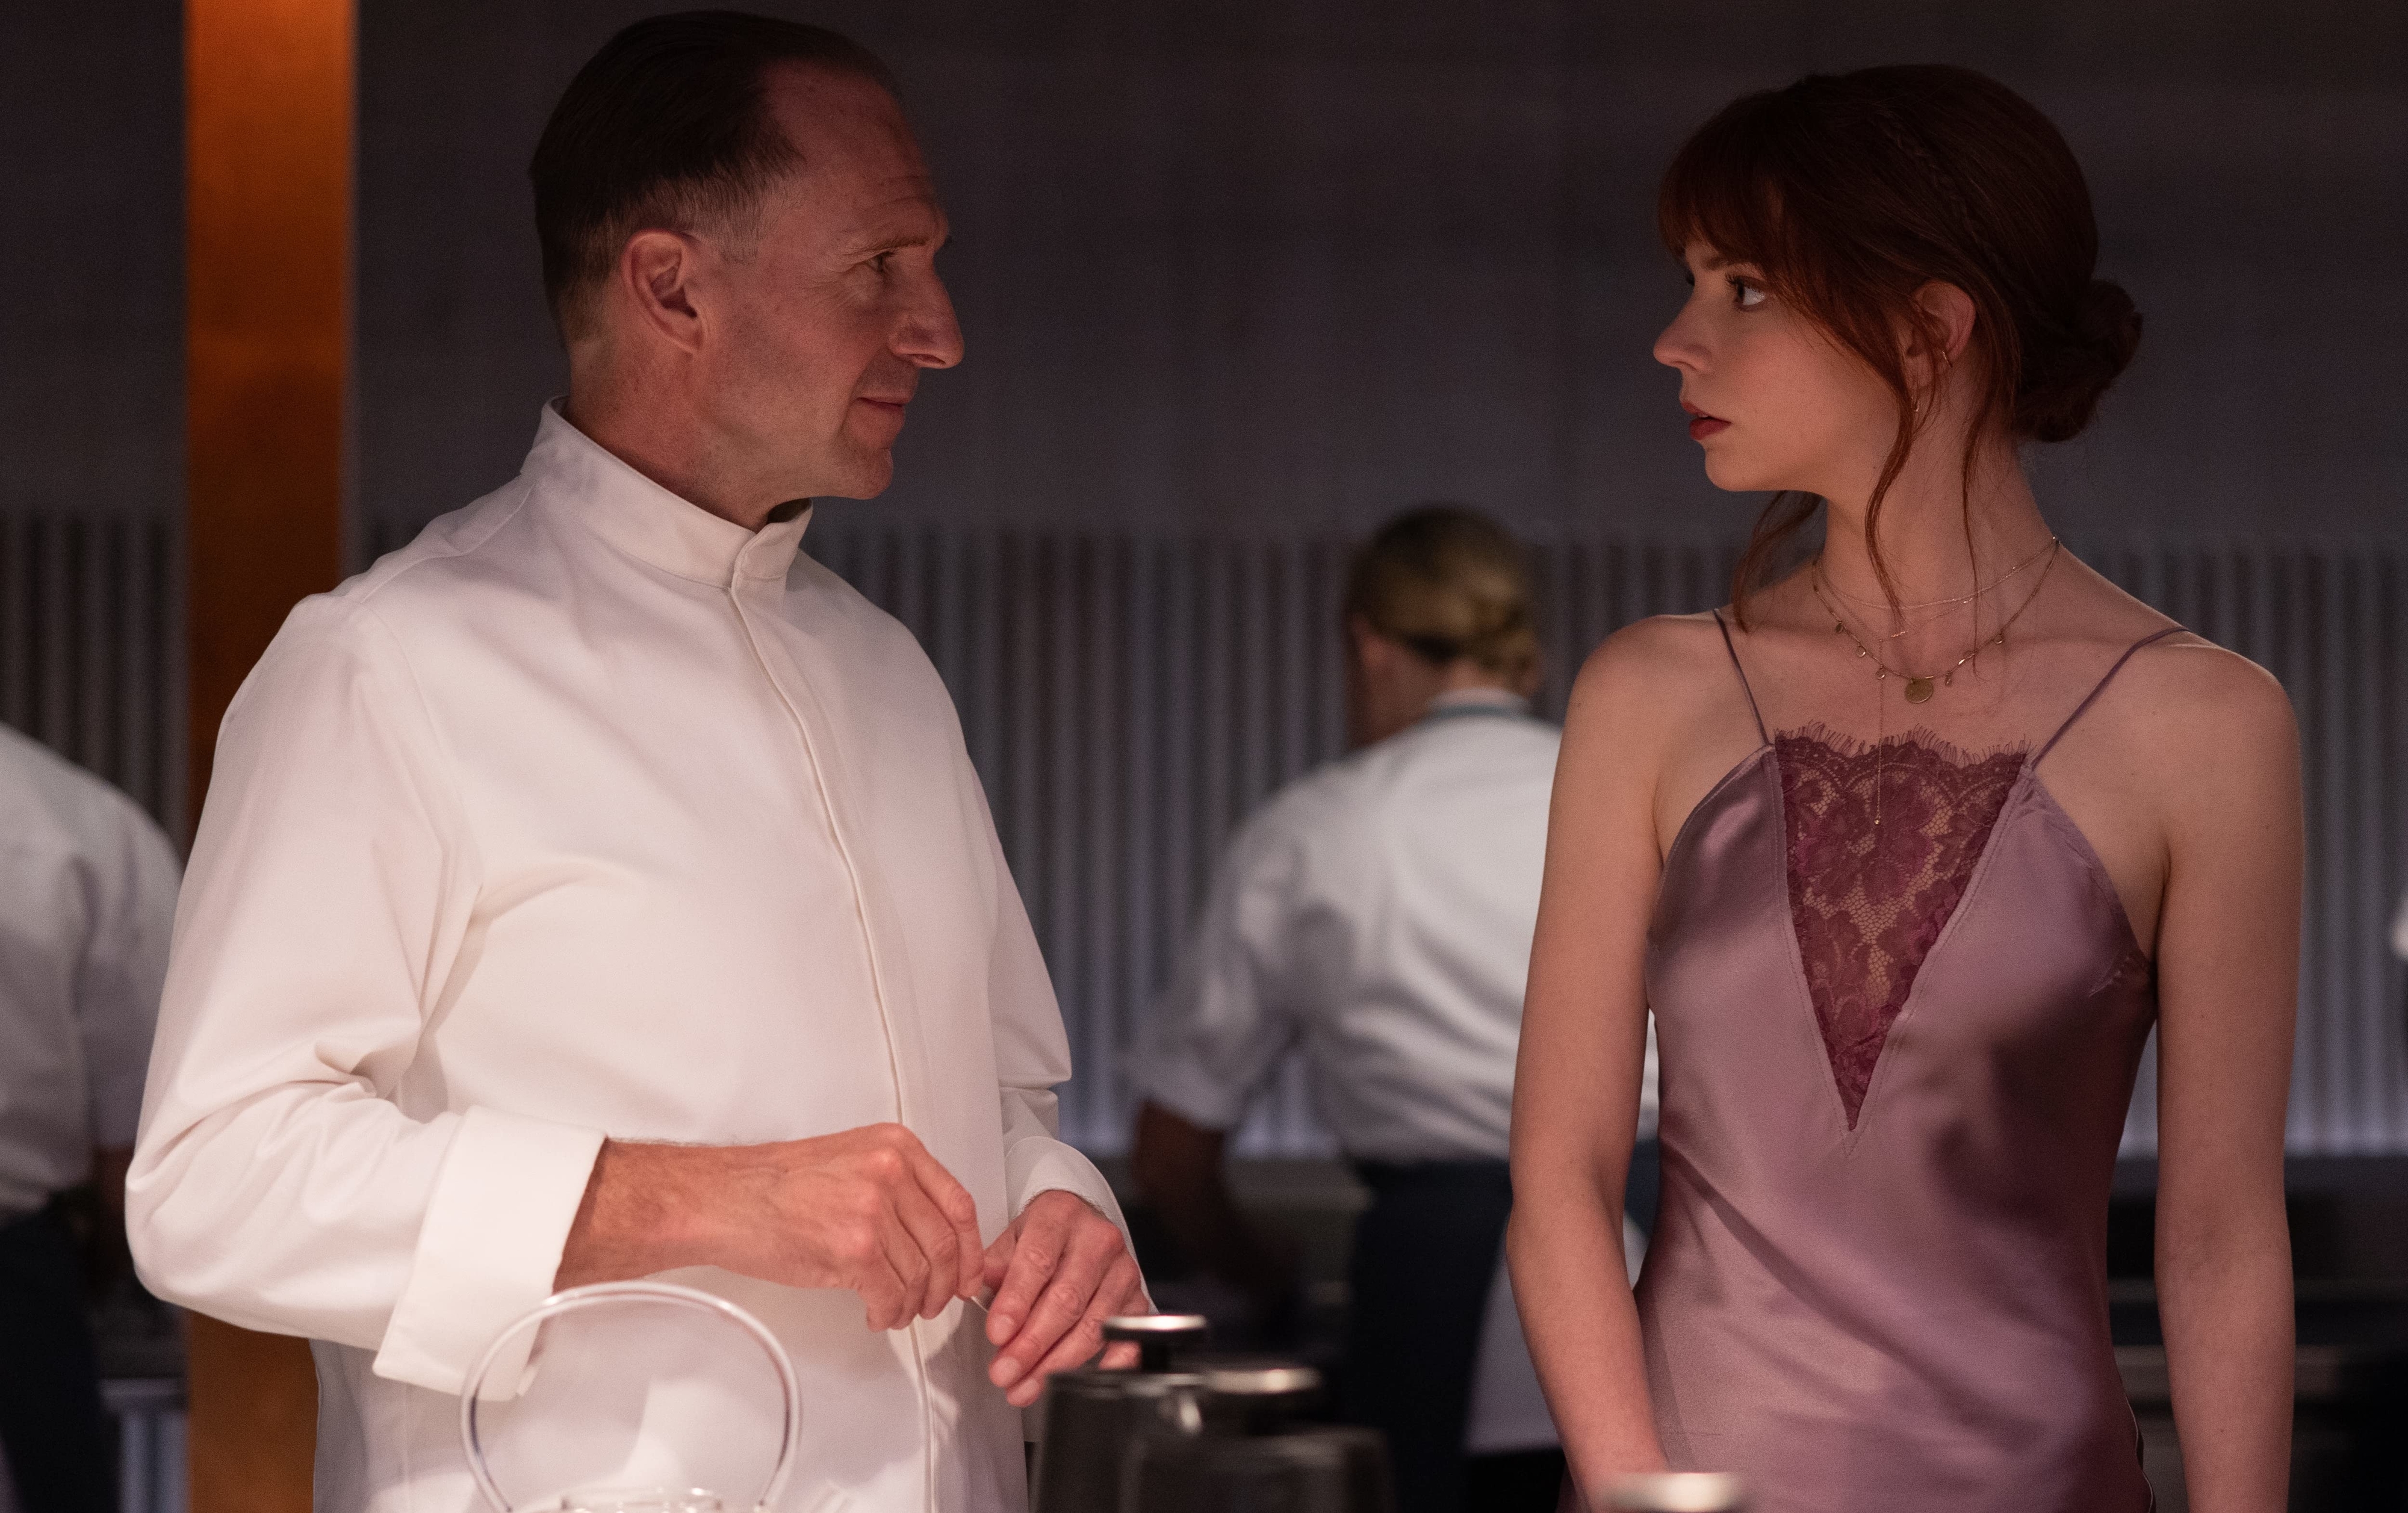 Two actors in a scene from a TV show or movie, man in a chef&#x27;s attire and woman in a formal dress, engaged in conversation